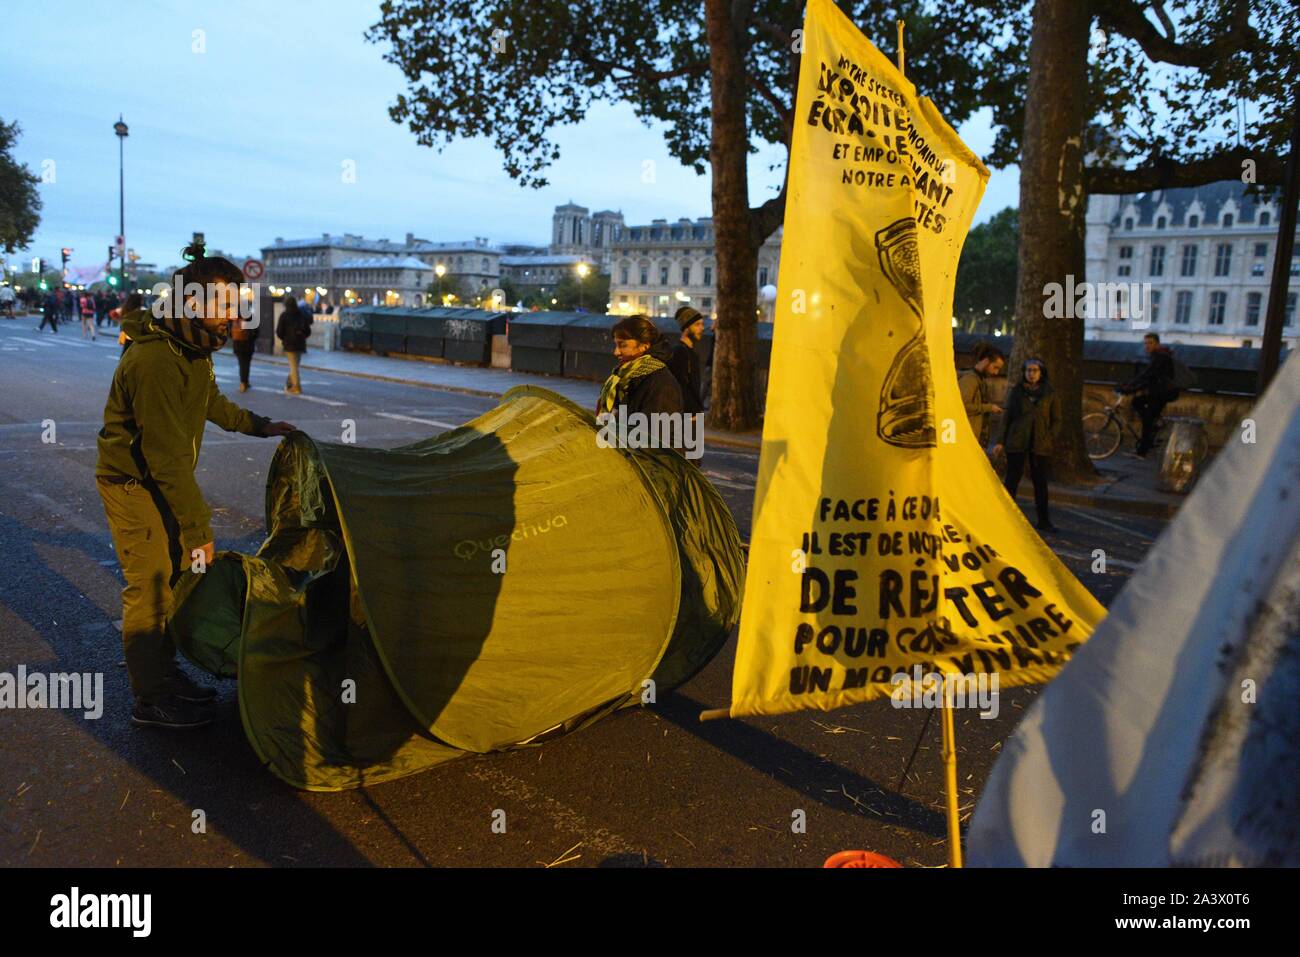 *** STRICTLY NO SALES TO FRENCH MEDIA OR PUBLISHERS *** October 07, 2019 - Paris, France: Activists from  Extinction Rebellion set up a small camp where they prepare to spend the night to enforce a blockade of Place du Chatelet in central Paris as part of their global environment protest movement. Stock Photo